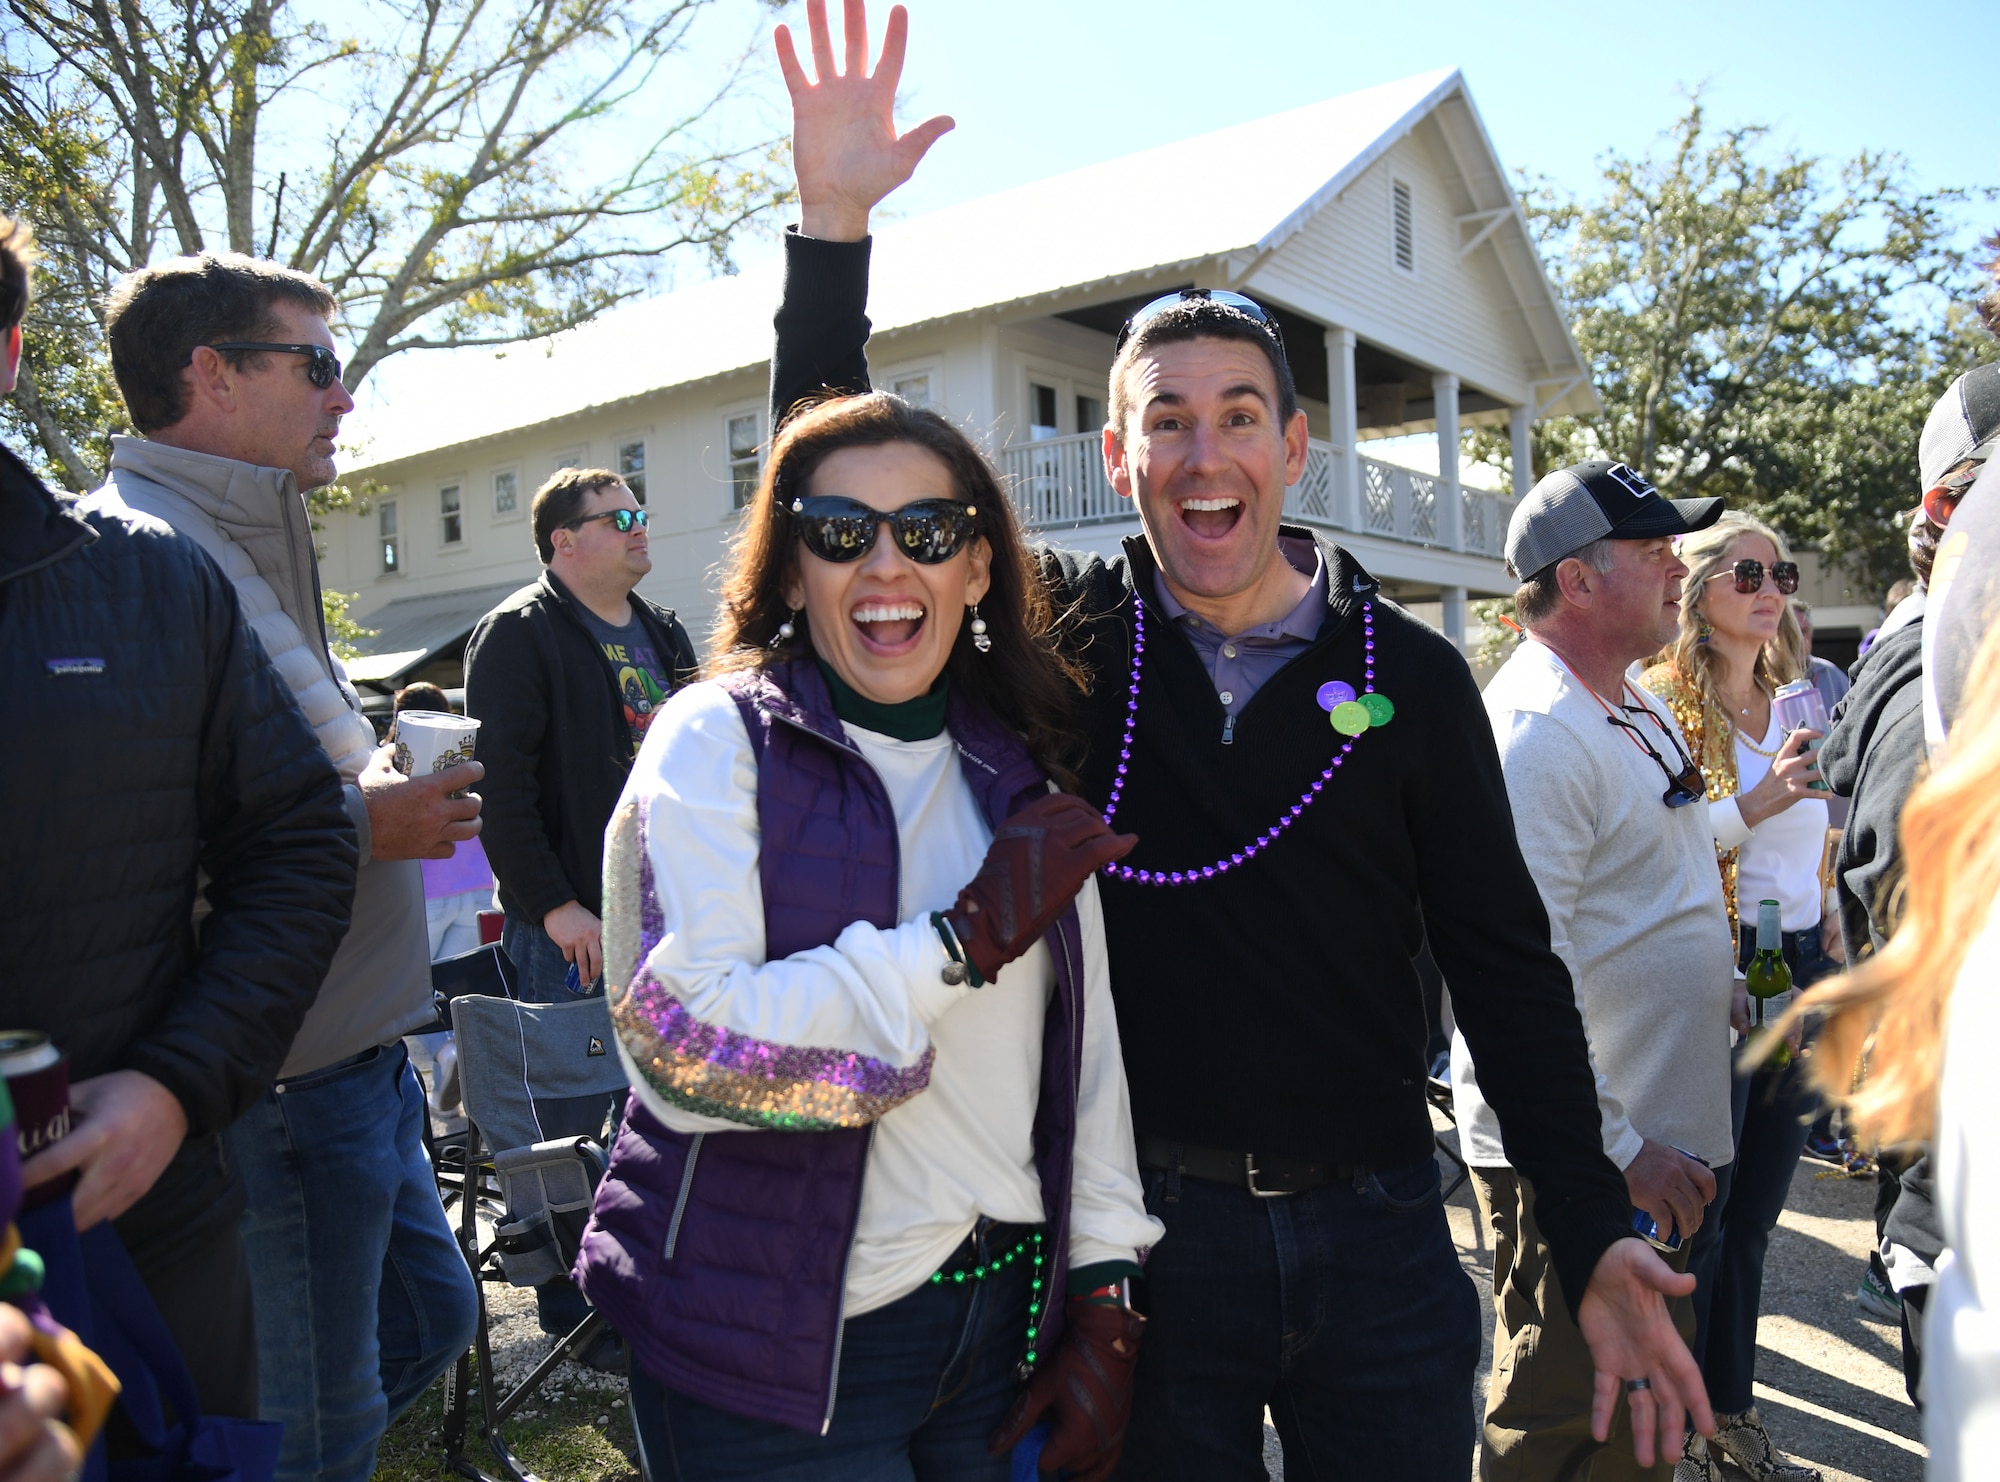 U.S. Air Force Col. Jason Allen, 81st Training Wing commander, and his wife, Mayra, pose for a photo during the Ocean Springs Elks Mardi Gras Parade at Ocean Springs, Mississippi, Feb. 4, 2023.